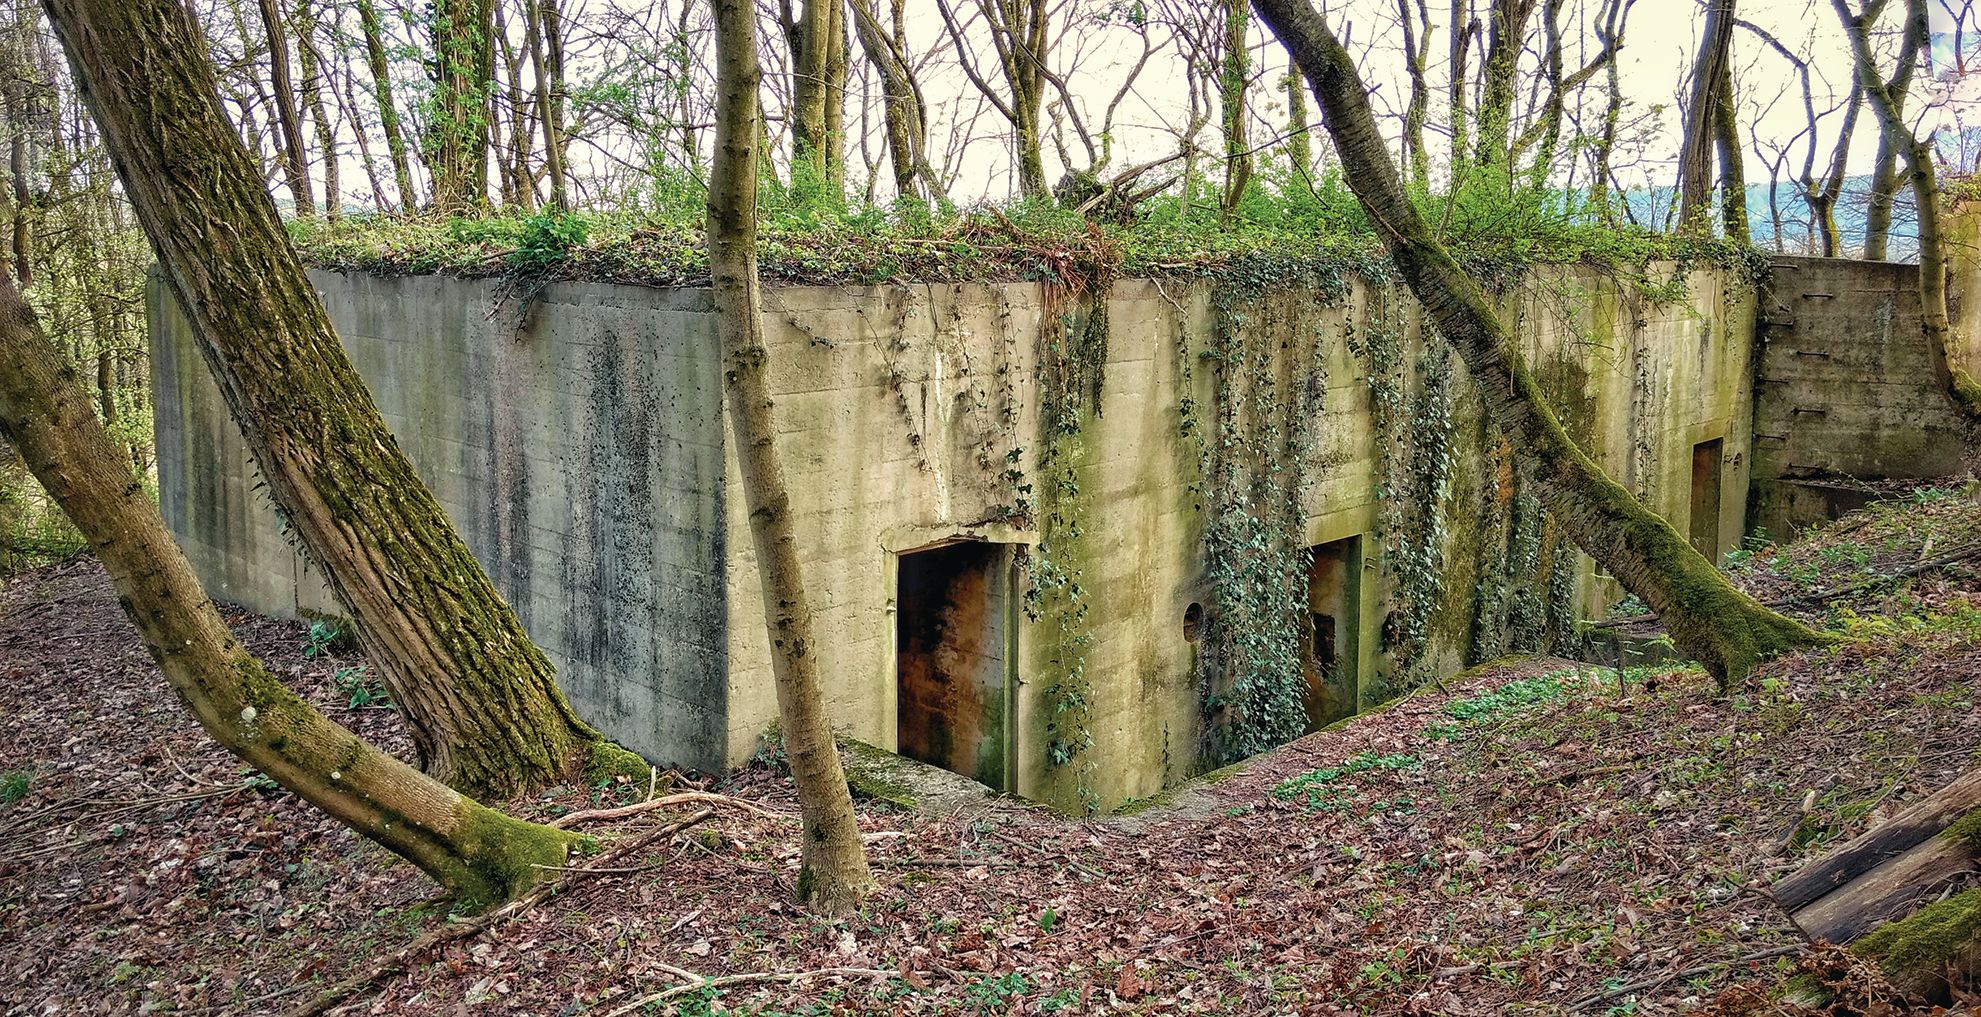 In addition to the dragon’s teeth, attacking forces also had to deal with reinforced-concrete bunkers such as this one south of Saarbrücken. Their silent remains still exist nearly 80 years after the war.